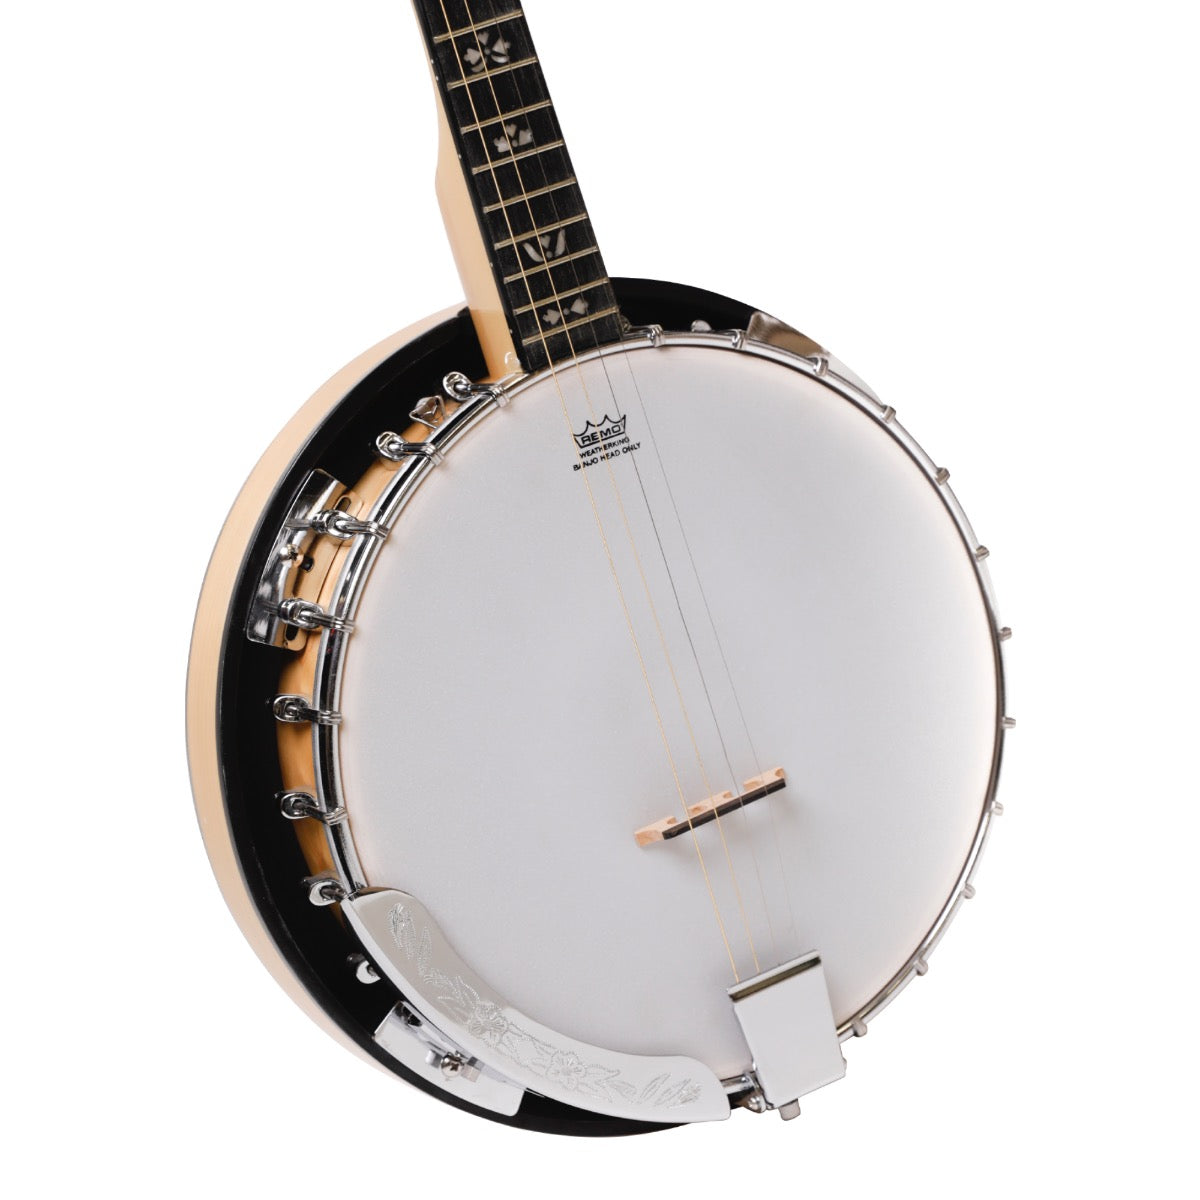 HEARTLAND DELUXE IRISH TENOR BANJO 19 FRETS WITH 24 BRACKET AND CLOSED SOLID BACK MAPLE FINISH